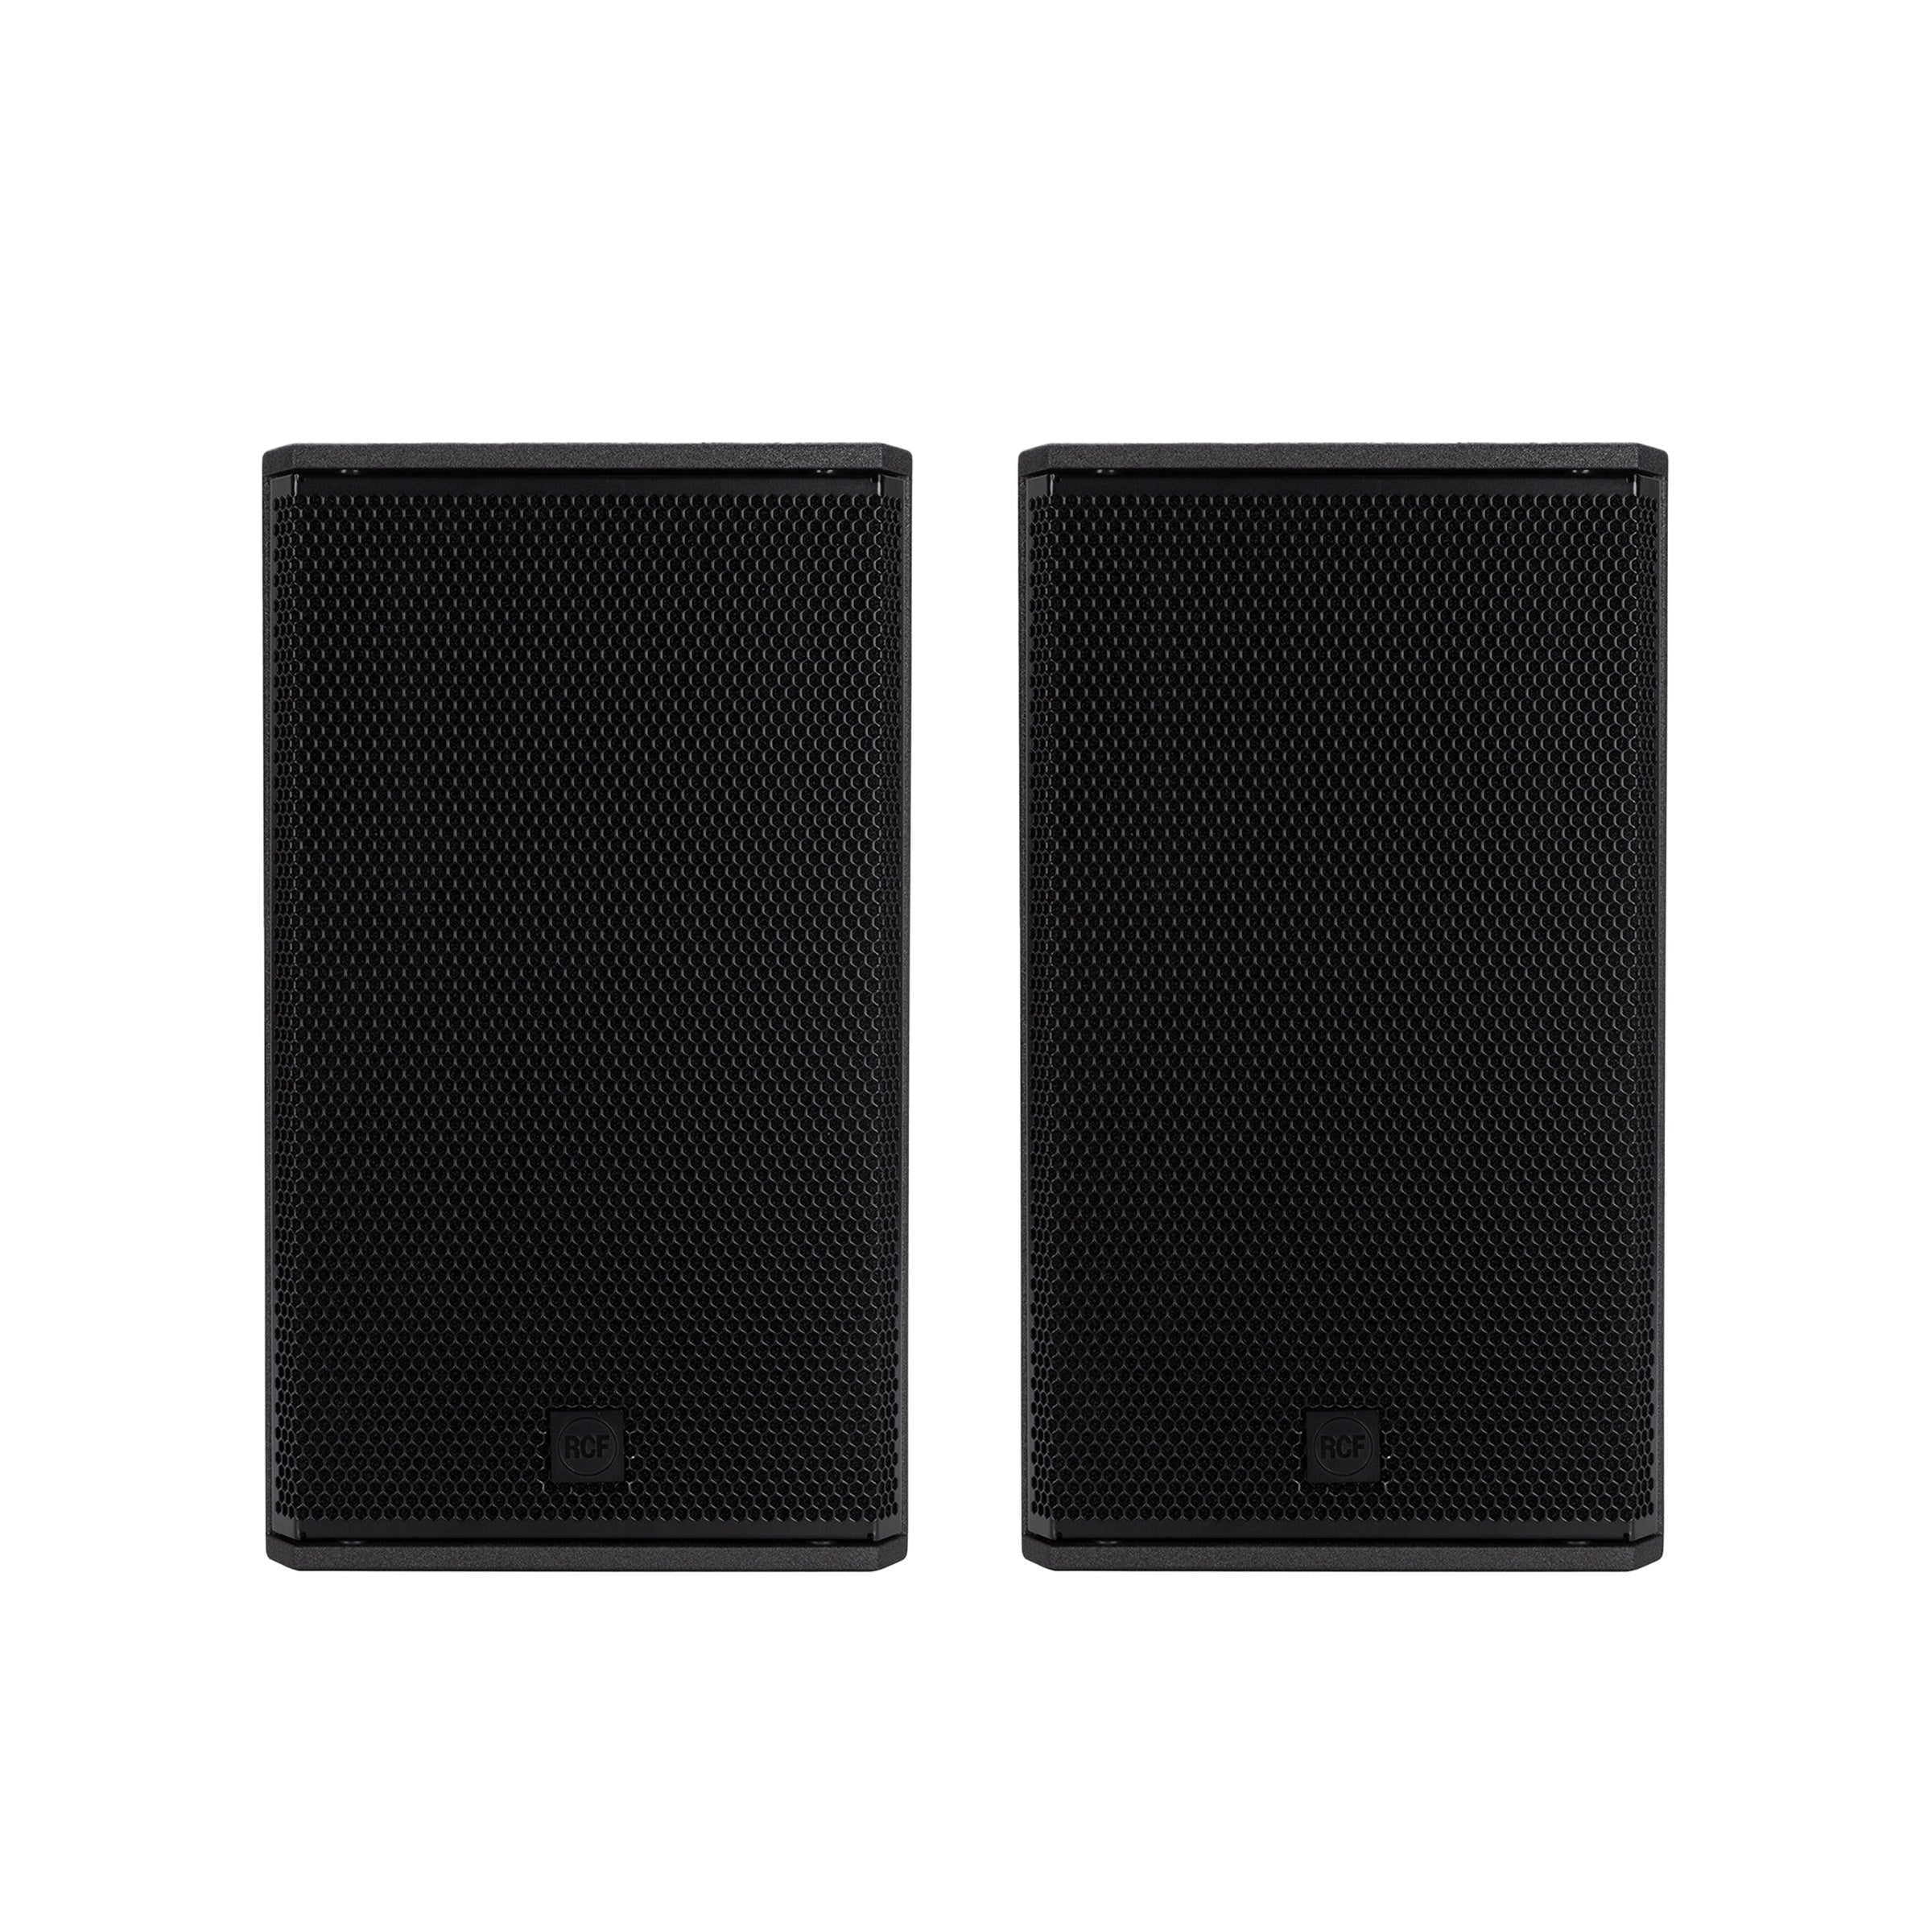 RCF NX 912-A Two Way Active PA Speaker (Pair)